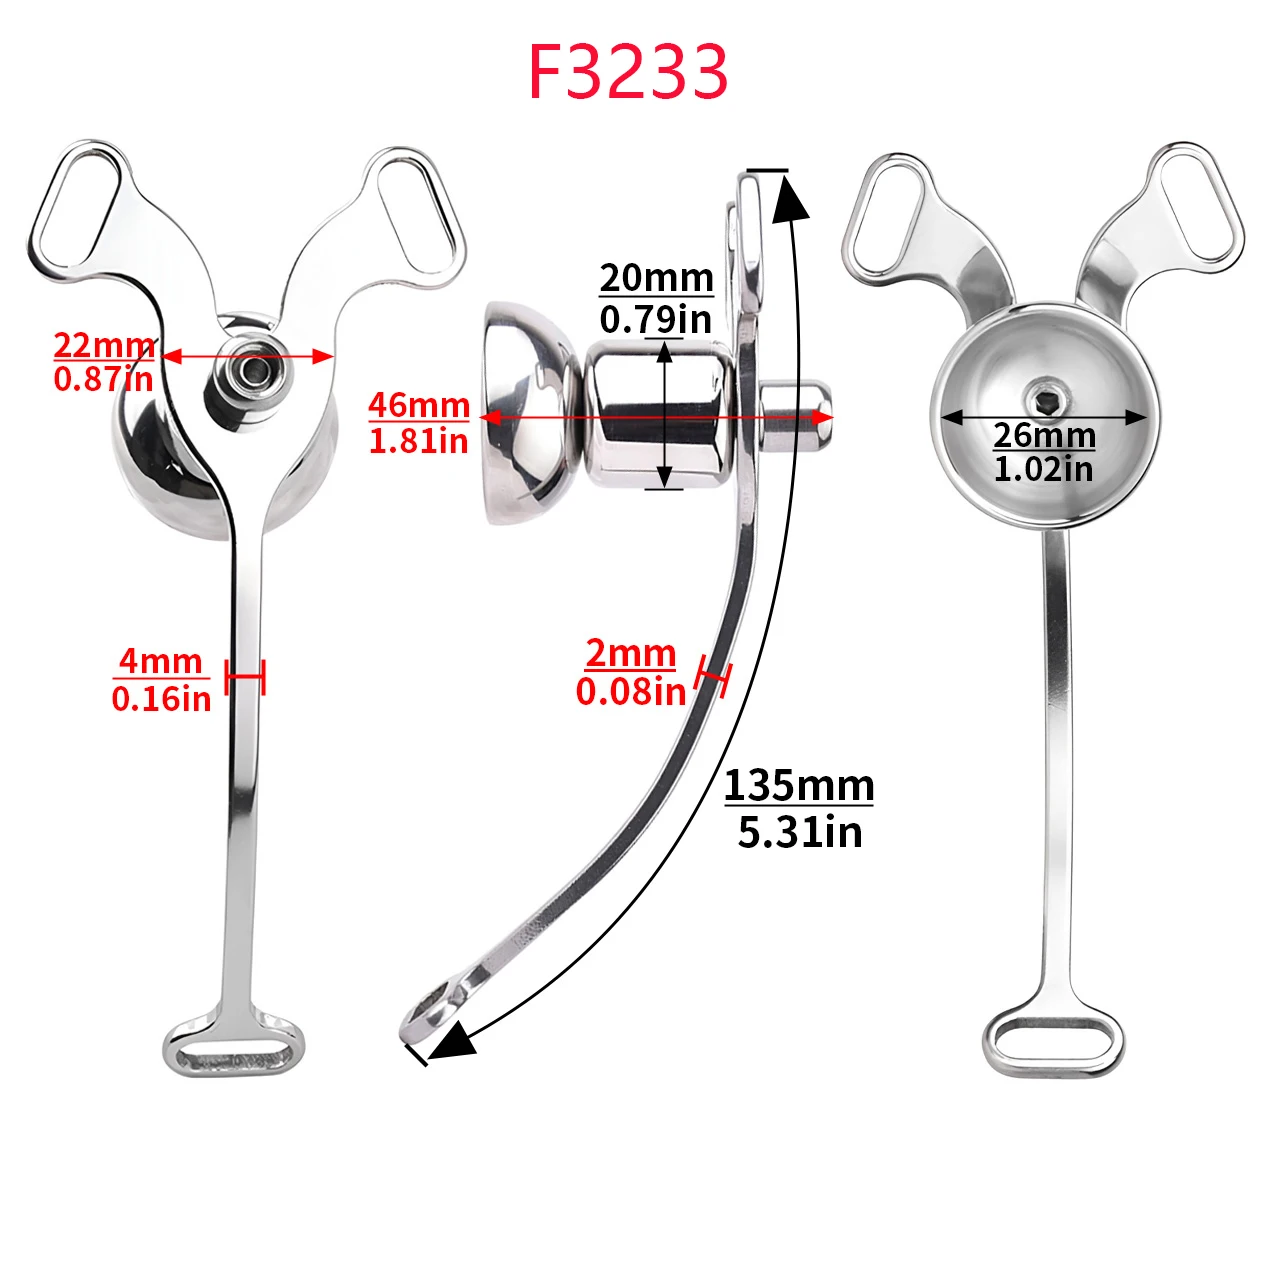 FAAK Strap-ons Stainless Steel Chastity Cages Flat Penis Lock with silicone Intimate Vagina Sex Toy For Man Female Role Playing